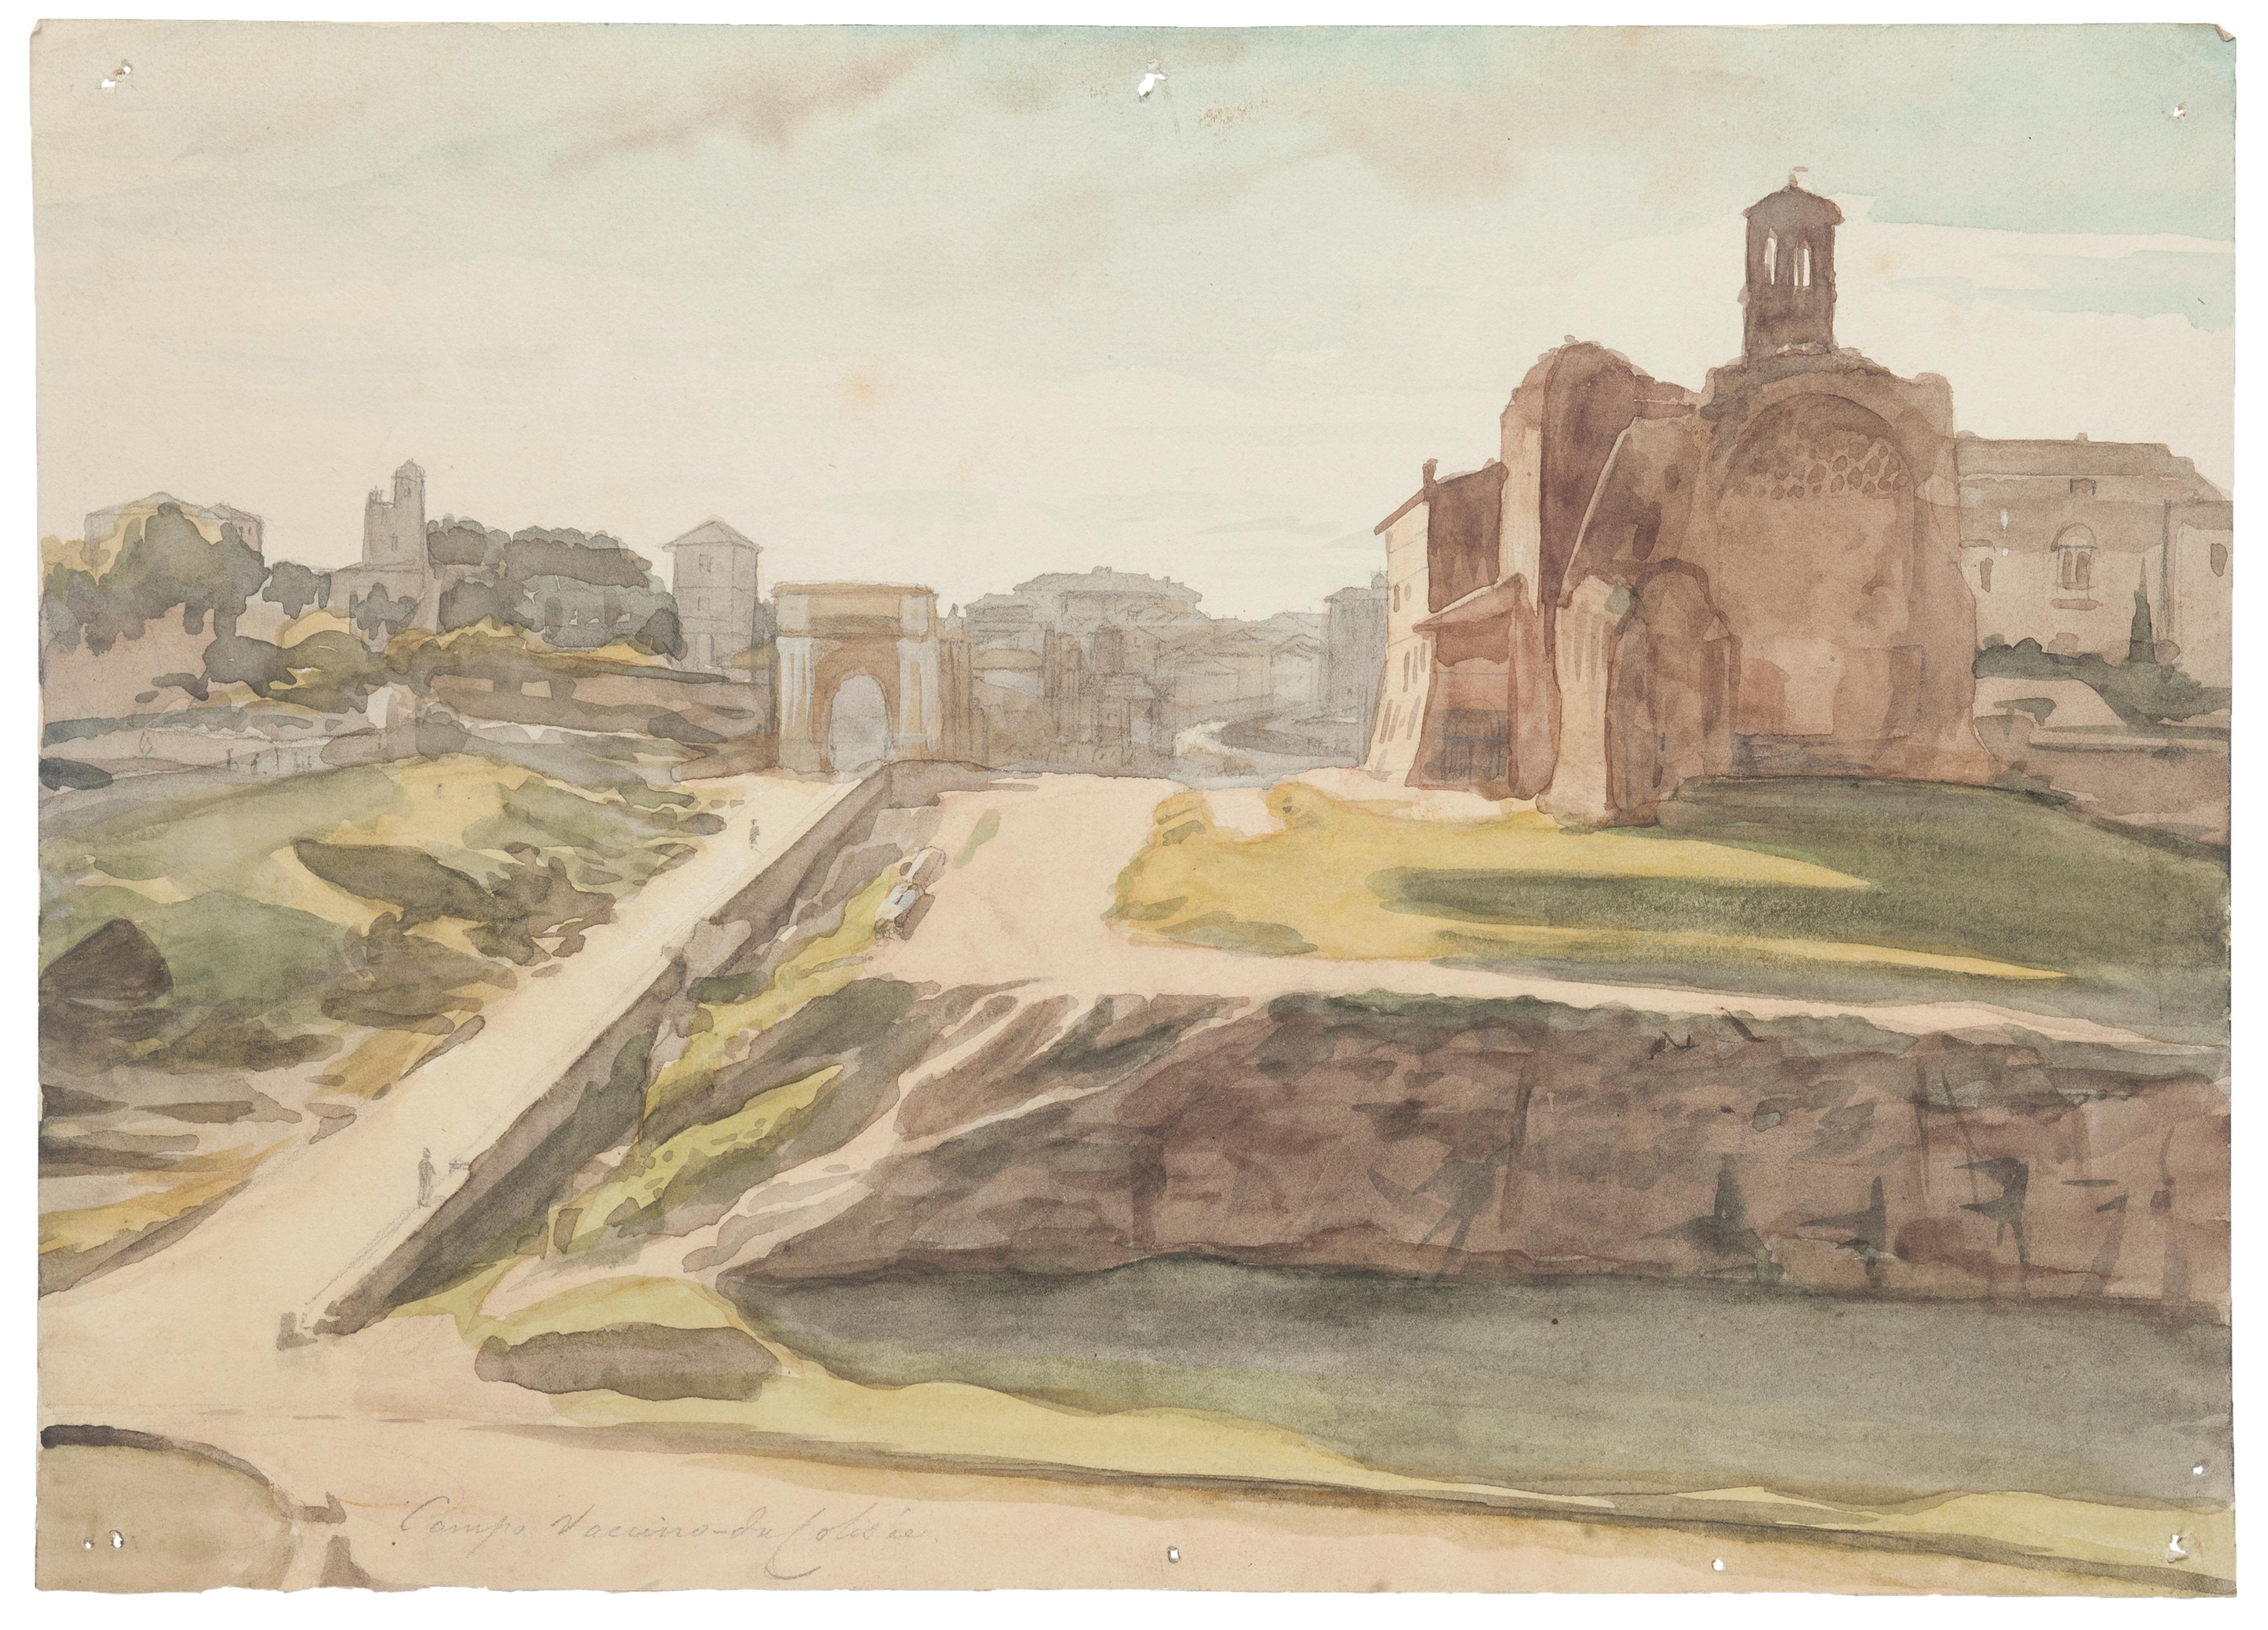 "View of Ancient Rome from the Colosseum" is an original drawing in mixed media on paper, realized by Jean Delpech (1916-1988). 
The state of preservation of the artwork is very good.

Sheet dimension: 19 x 27 cm.

The artwork represents beautiful